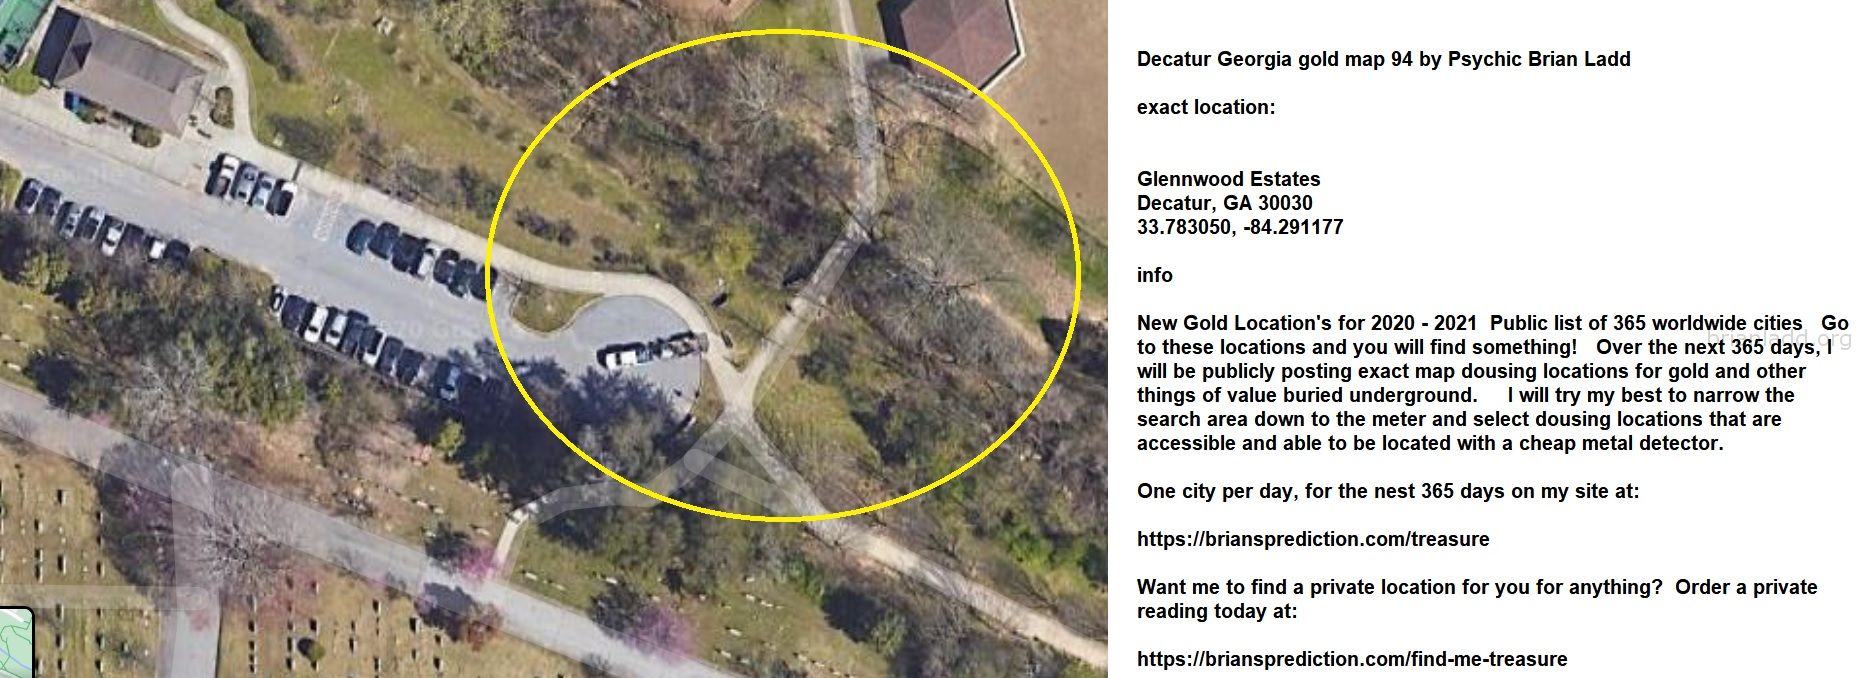 Decatur Georgia Gold Map 94 By Psychic Brian Ladd - Decatur Georgia Gold Map 94 By Psychic Brian Ladd  Exact Location:  ...
Decatur Georgia Gold Map 94 By Psychic Brian Ladd  Exact Location:  Glennwood Estates  Decatur, Ga 30030  33.783050, -84.291177  Info  New Gold Location'S For 2020 - 2021  Public List Of 365 Worldwide Cities  Go To These Locations And You Will Find Something!  Over The Next 365 Days, I Will Be Publicly Posting Exact Map Dousing Locations For Gold And Other Things Of Value Buried Underground.  I Will Try My Best To Narrow The Search Area Down To The Meter And Select Dousing Locations That Are Accessible And Able To Be Located With A Cheap Metal Detector.  One City Per Day, For The Nest 365 Days On My Site At:   https://briansprediction.com/Treasure  Want Me To Find A Private Location For You For Anything?  Order A Private Reading Today At:   https://briansprediction.com/Find-Me-Treasure
